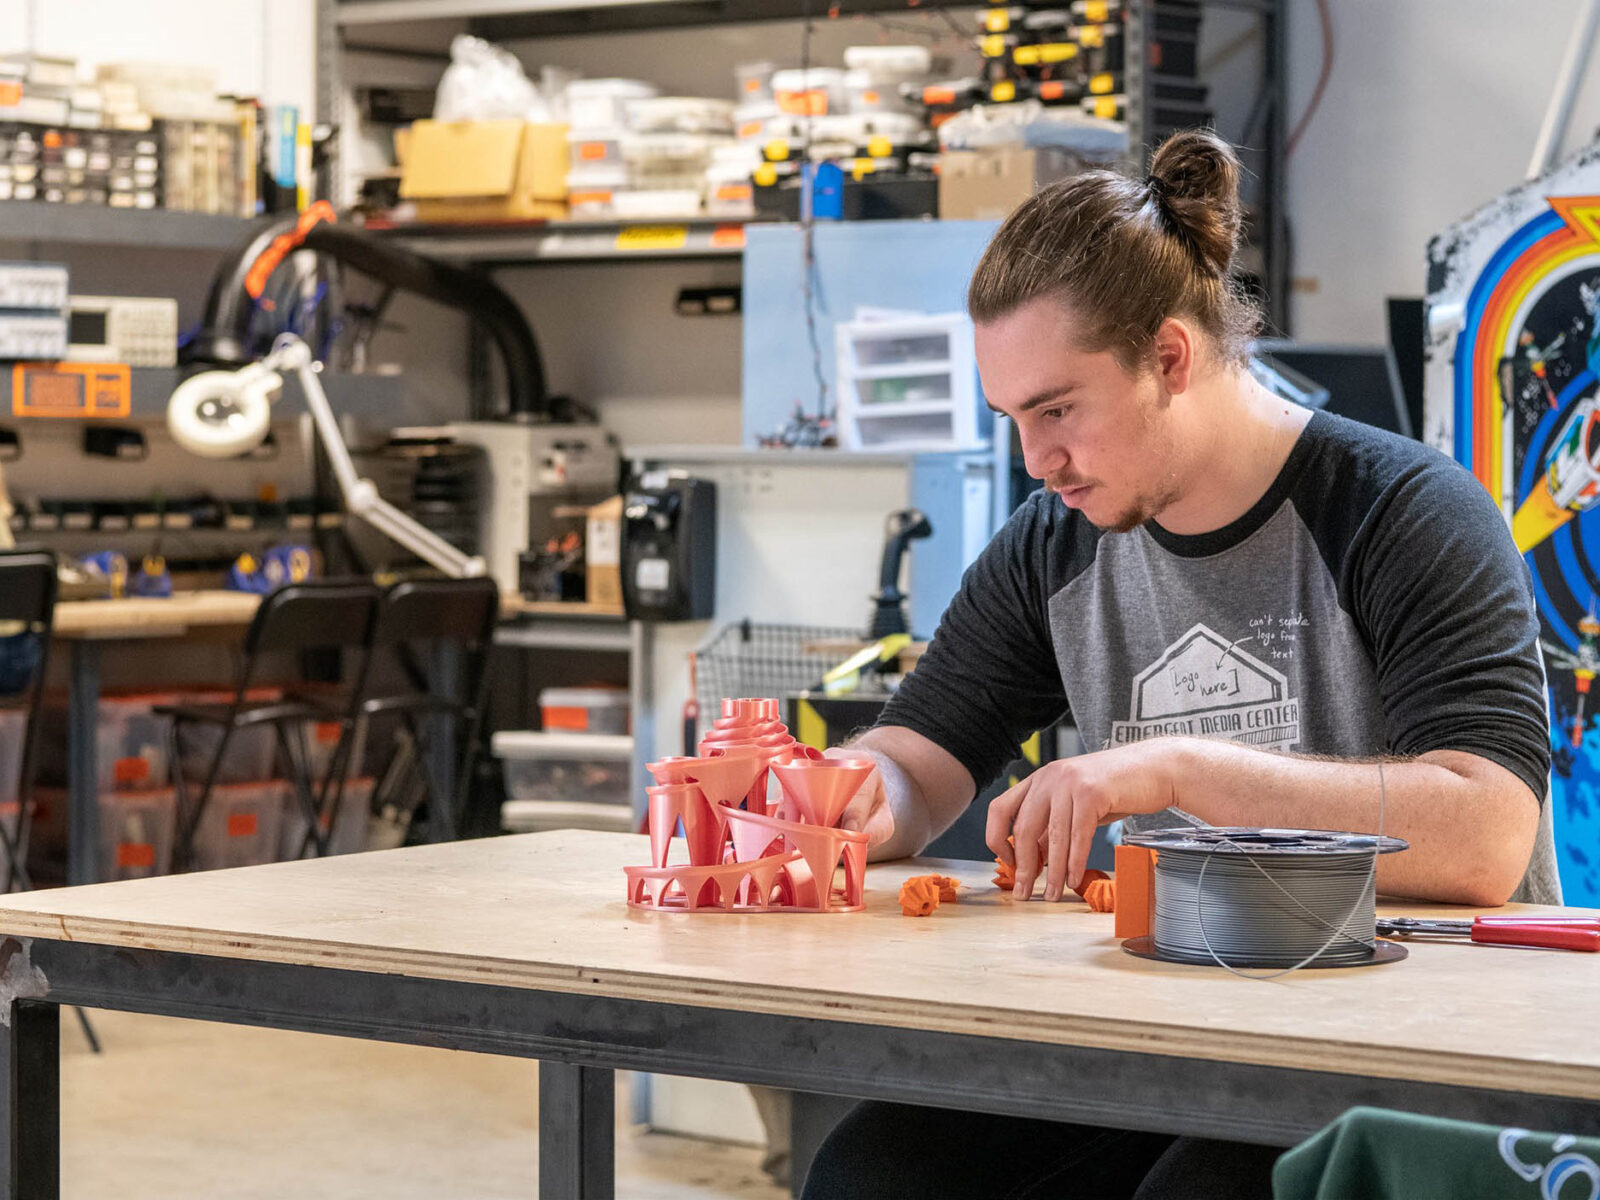 Student sitting at table working on assembling 3D printed components